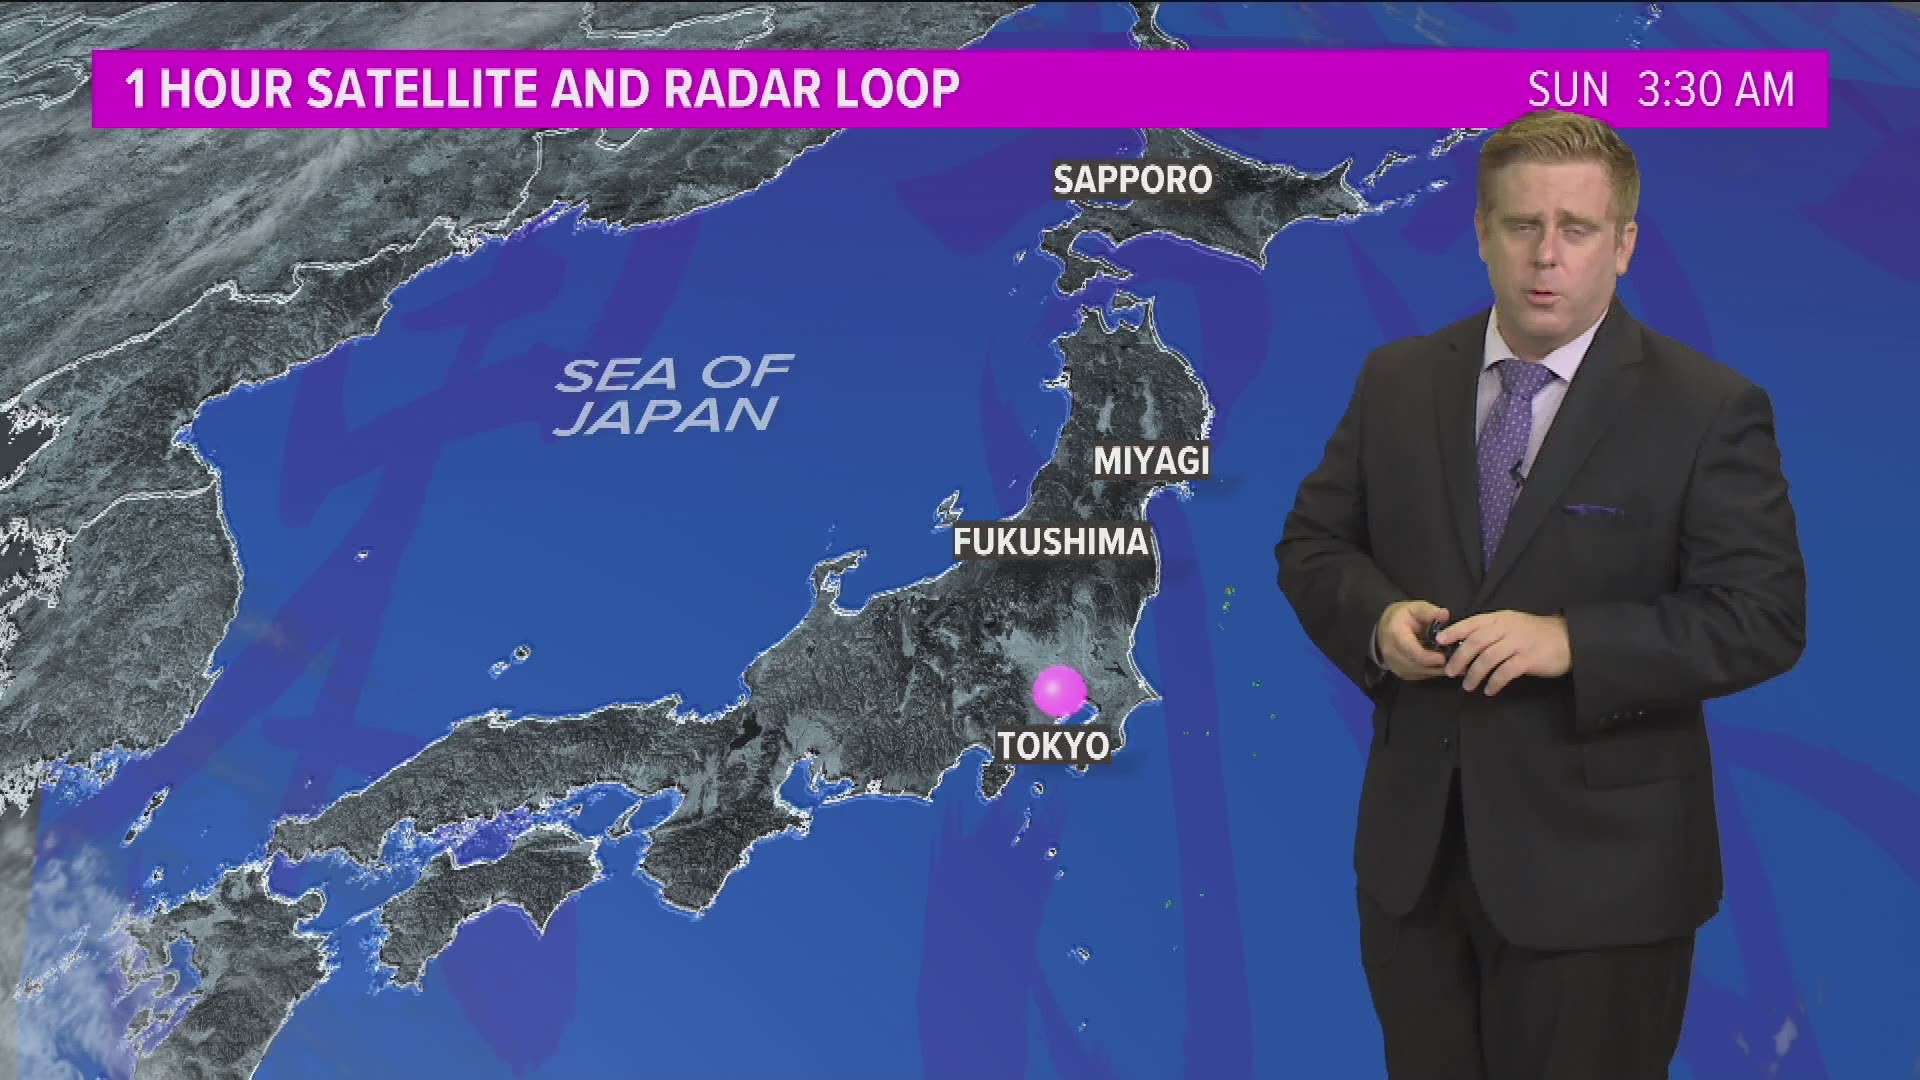 A tropical storm is expected to make landfall near Tokyo during the Olympic Games.